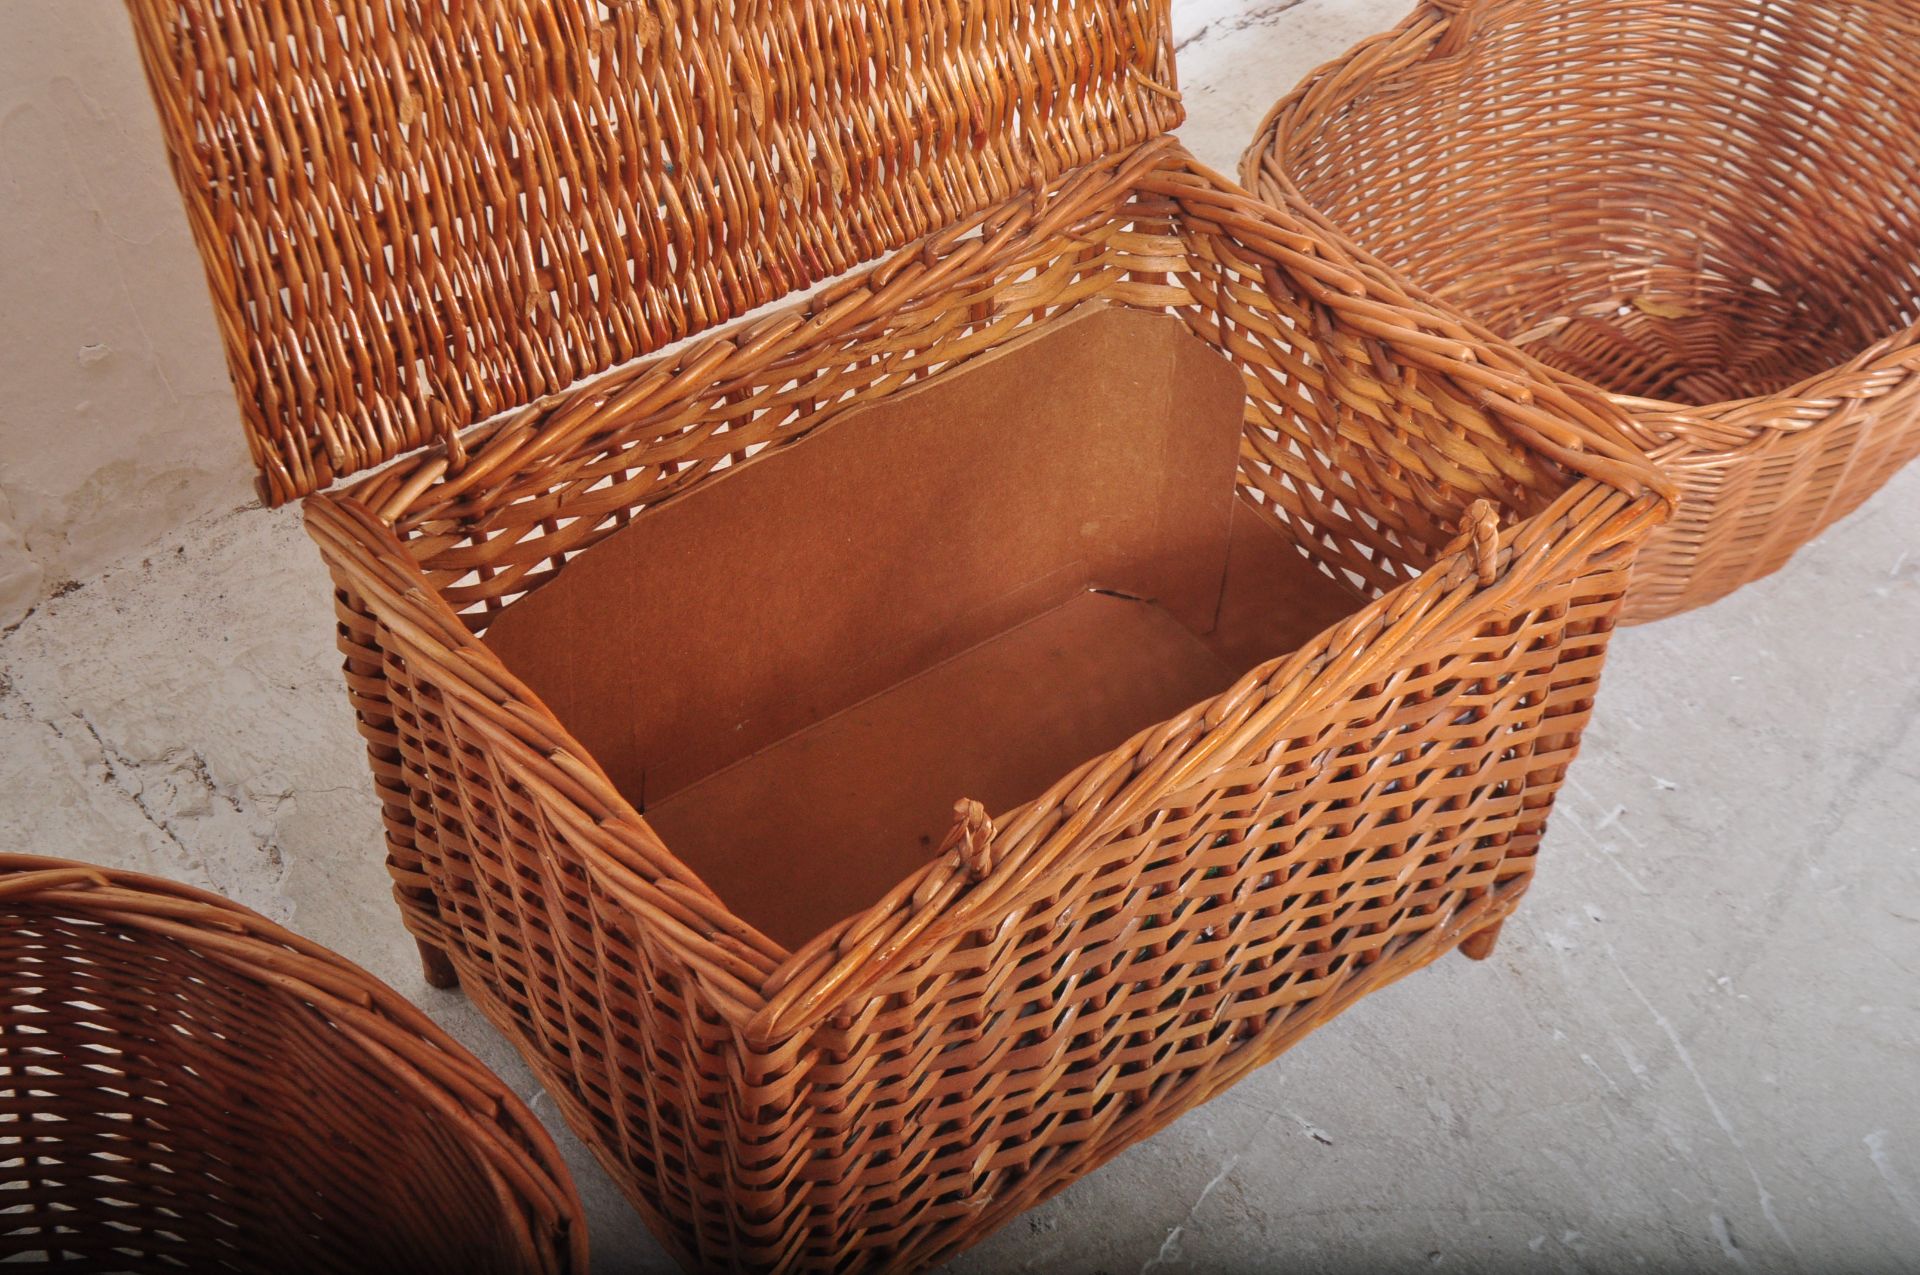 SET OF FOUR VINTAGE WICKER RATTAN PICNIC BASKETS - Image 4 of 5